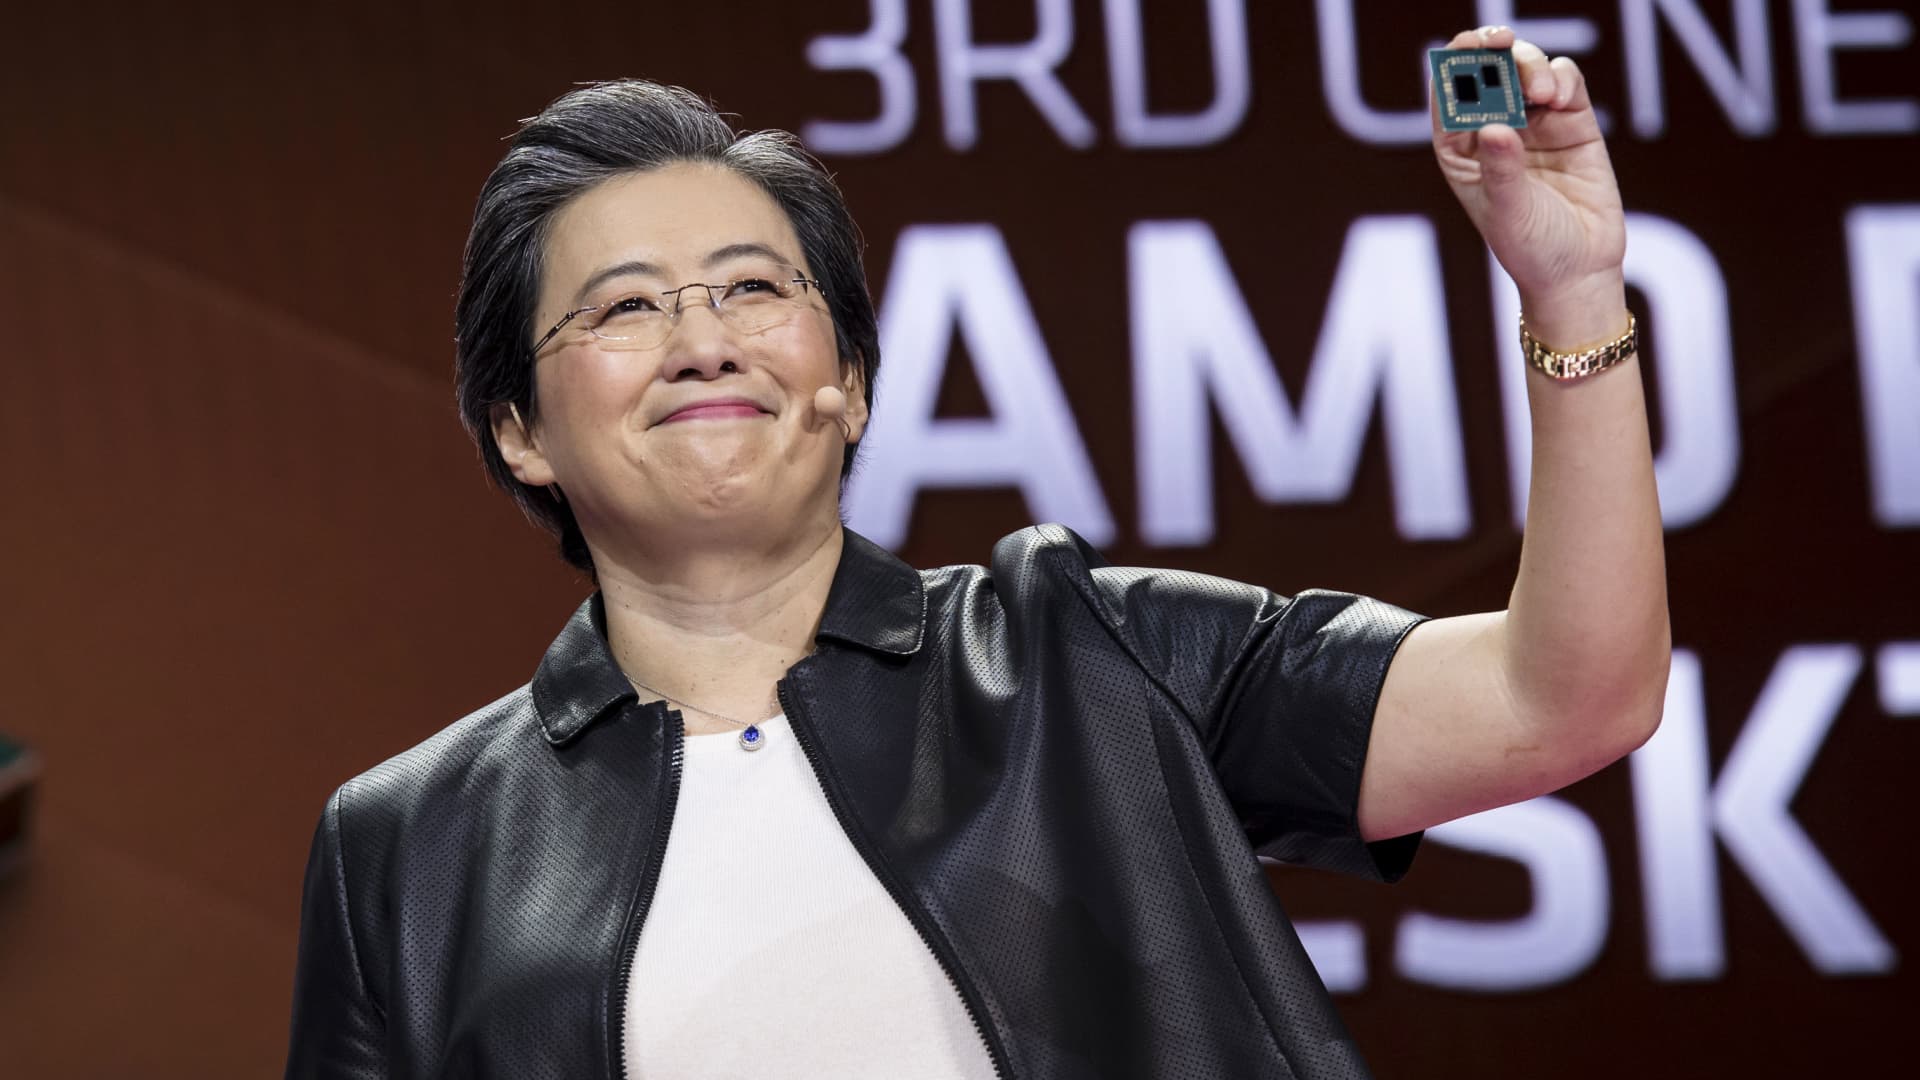 AMD shares fall more than 13% on weak outlook, dragging other chipmakers down